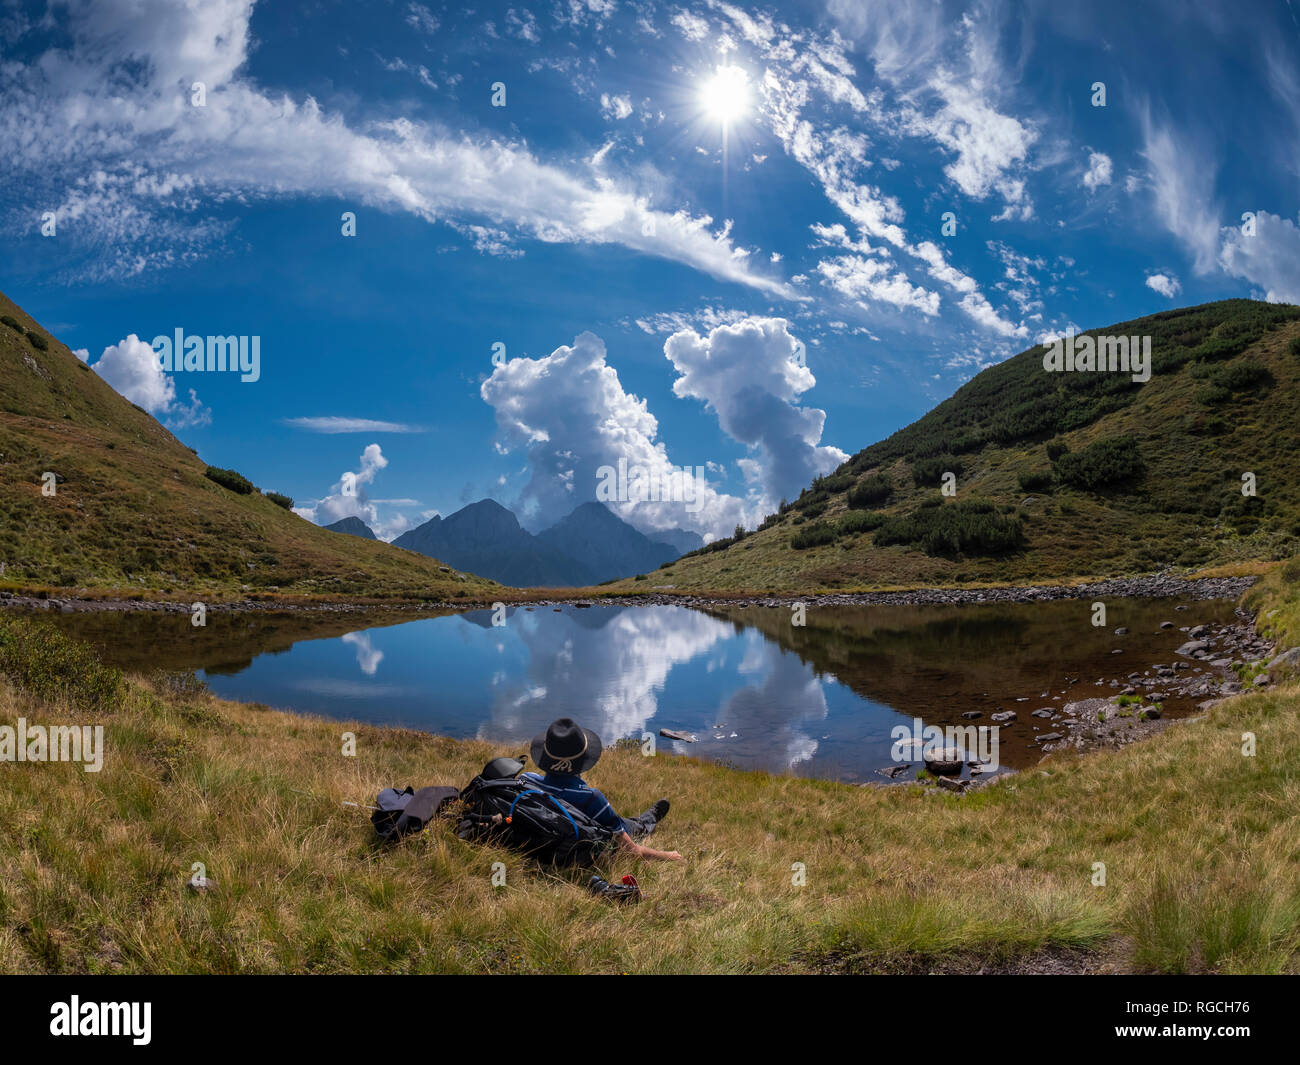 Italy, Lombardy, Bergamasque Alps, hiking lying on lakeside, looking to Mount Camino Stock Photo